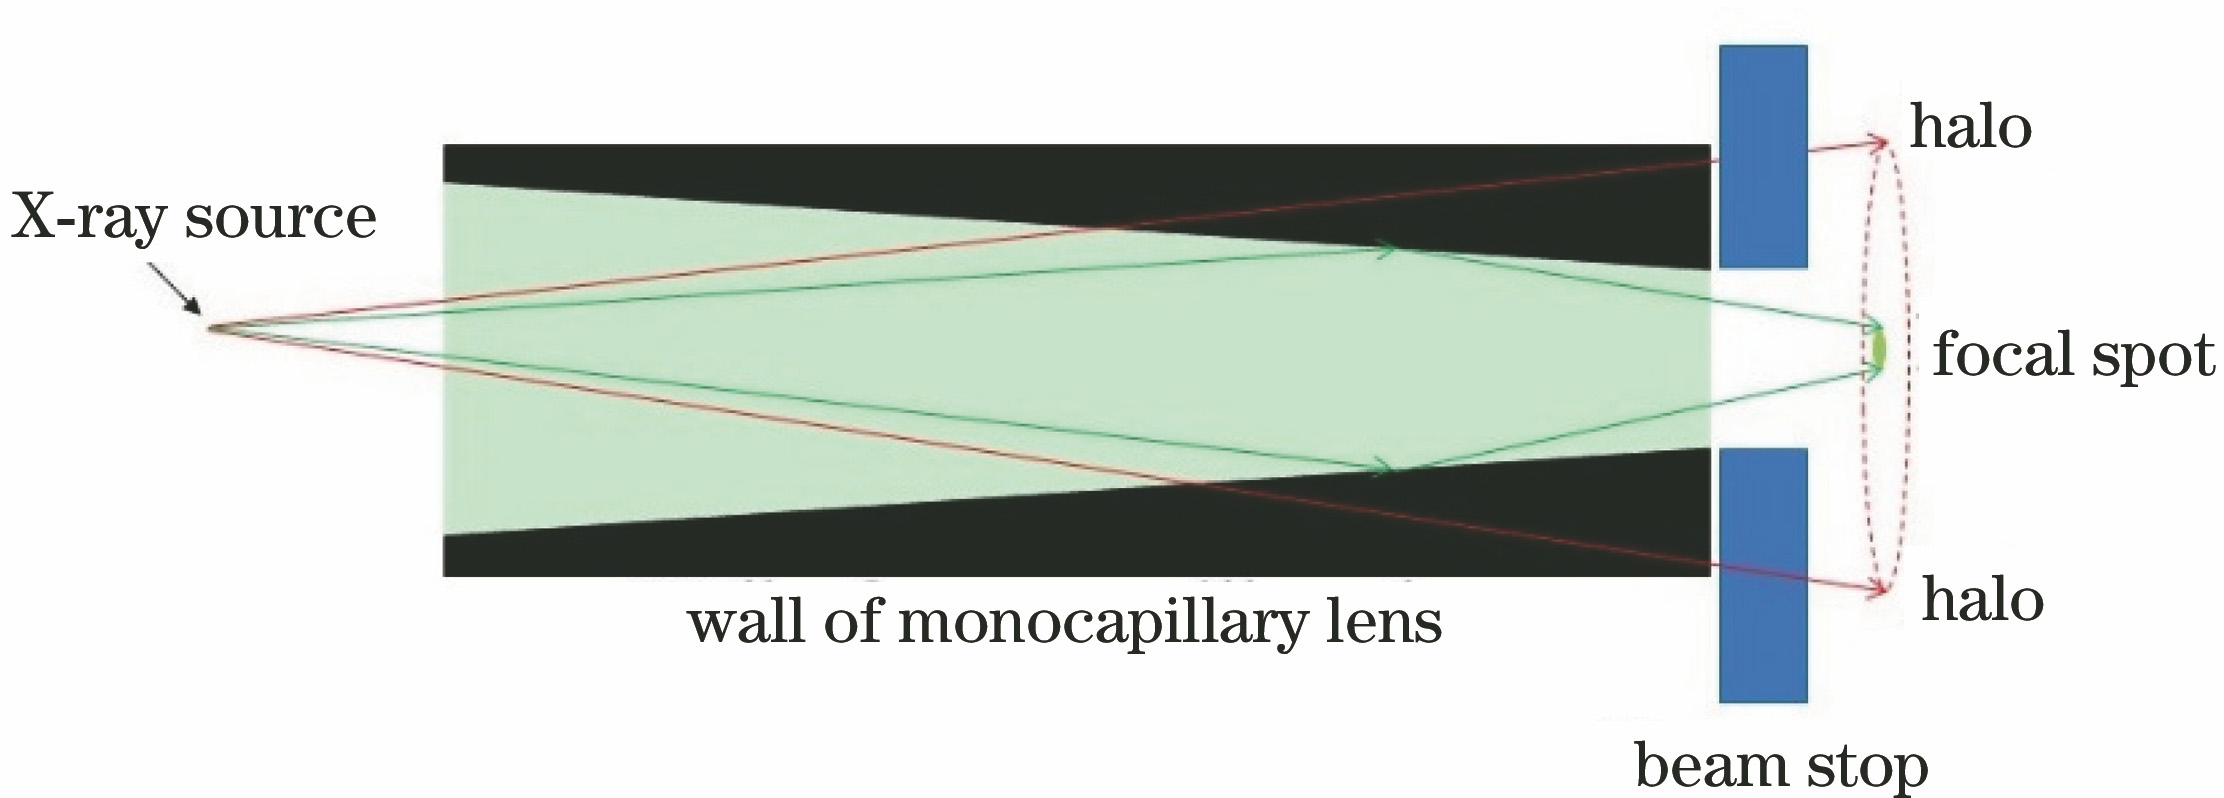 Schematic of X-ray penetrating monocapillary lens